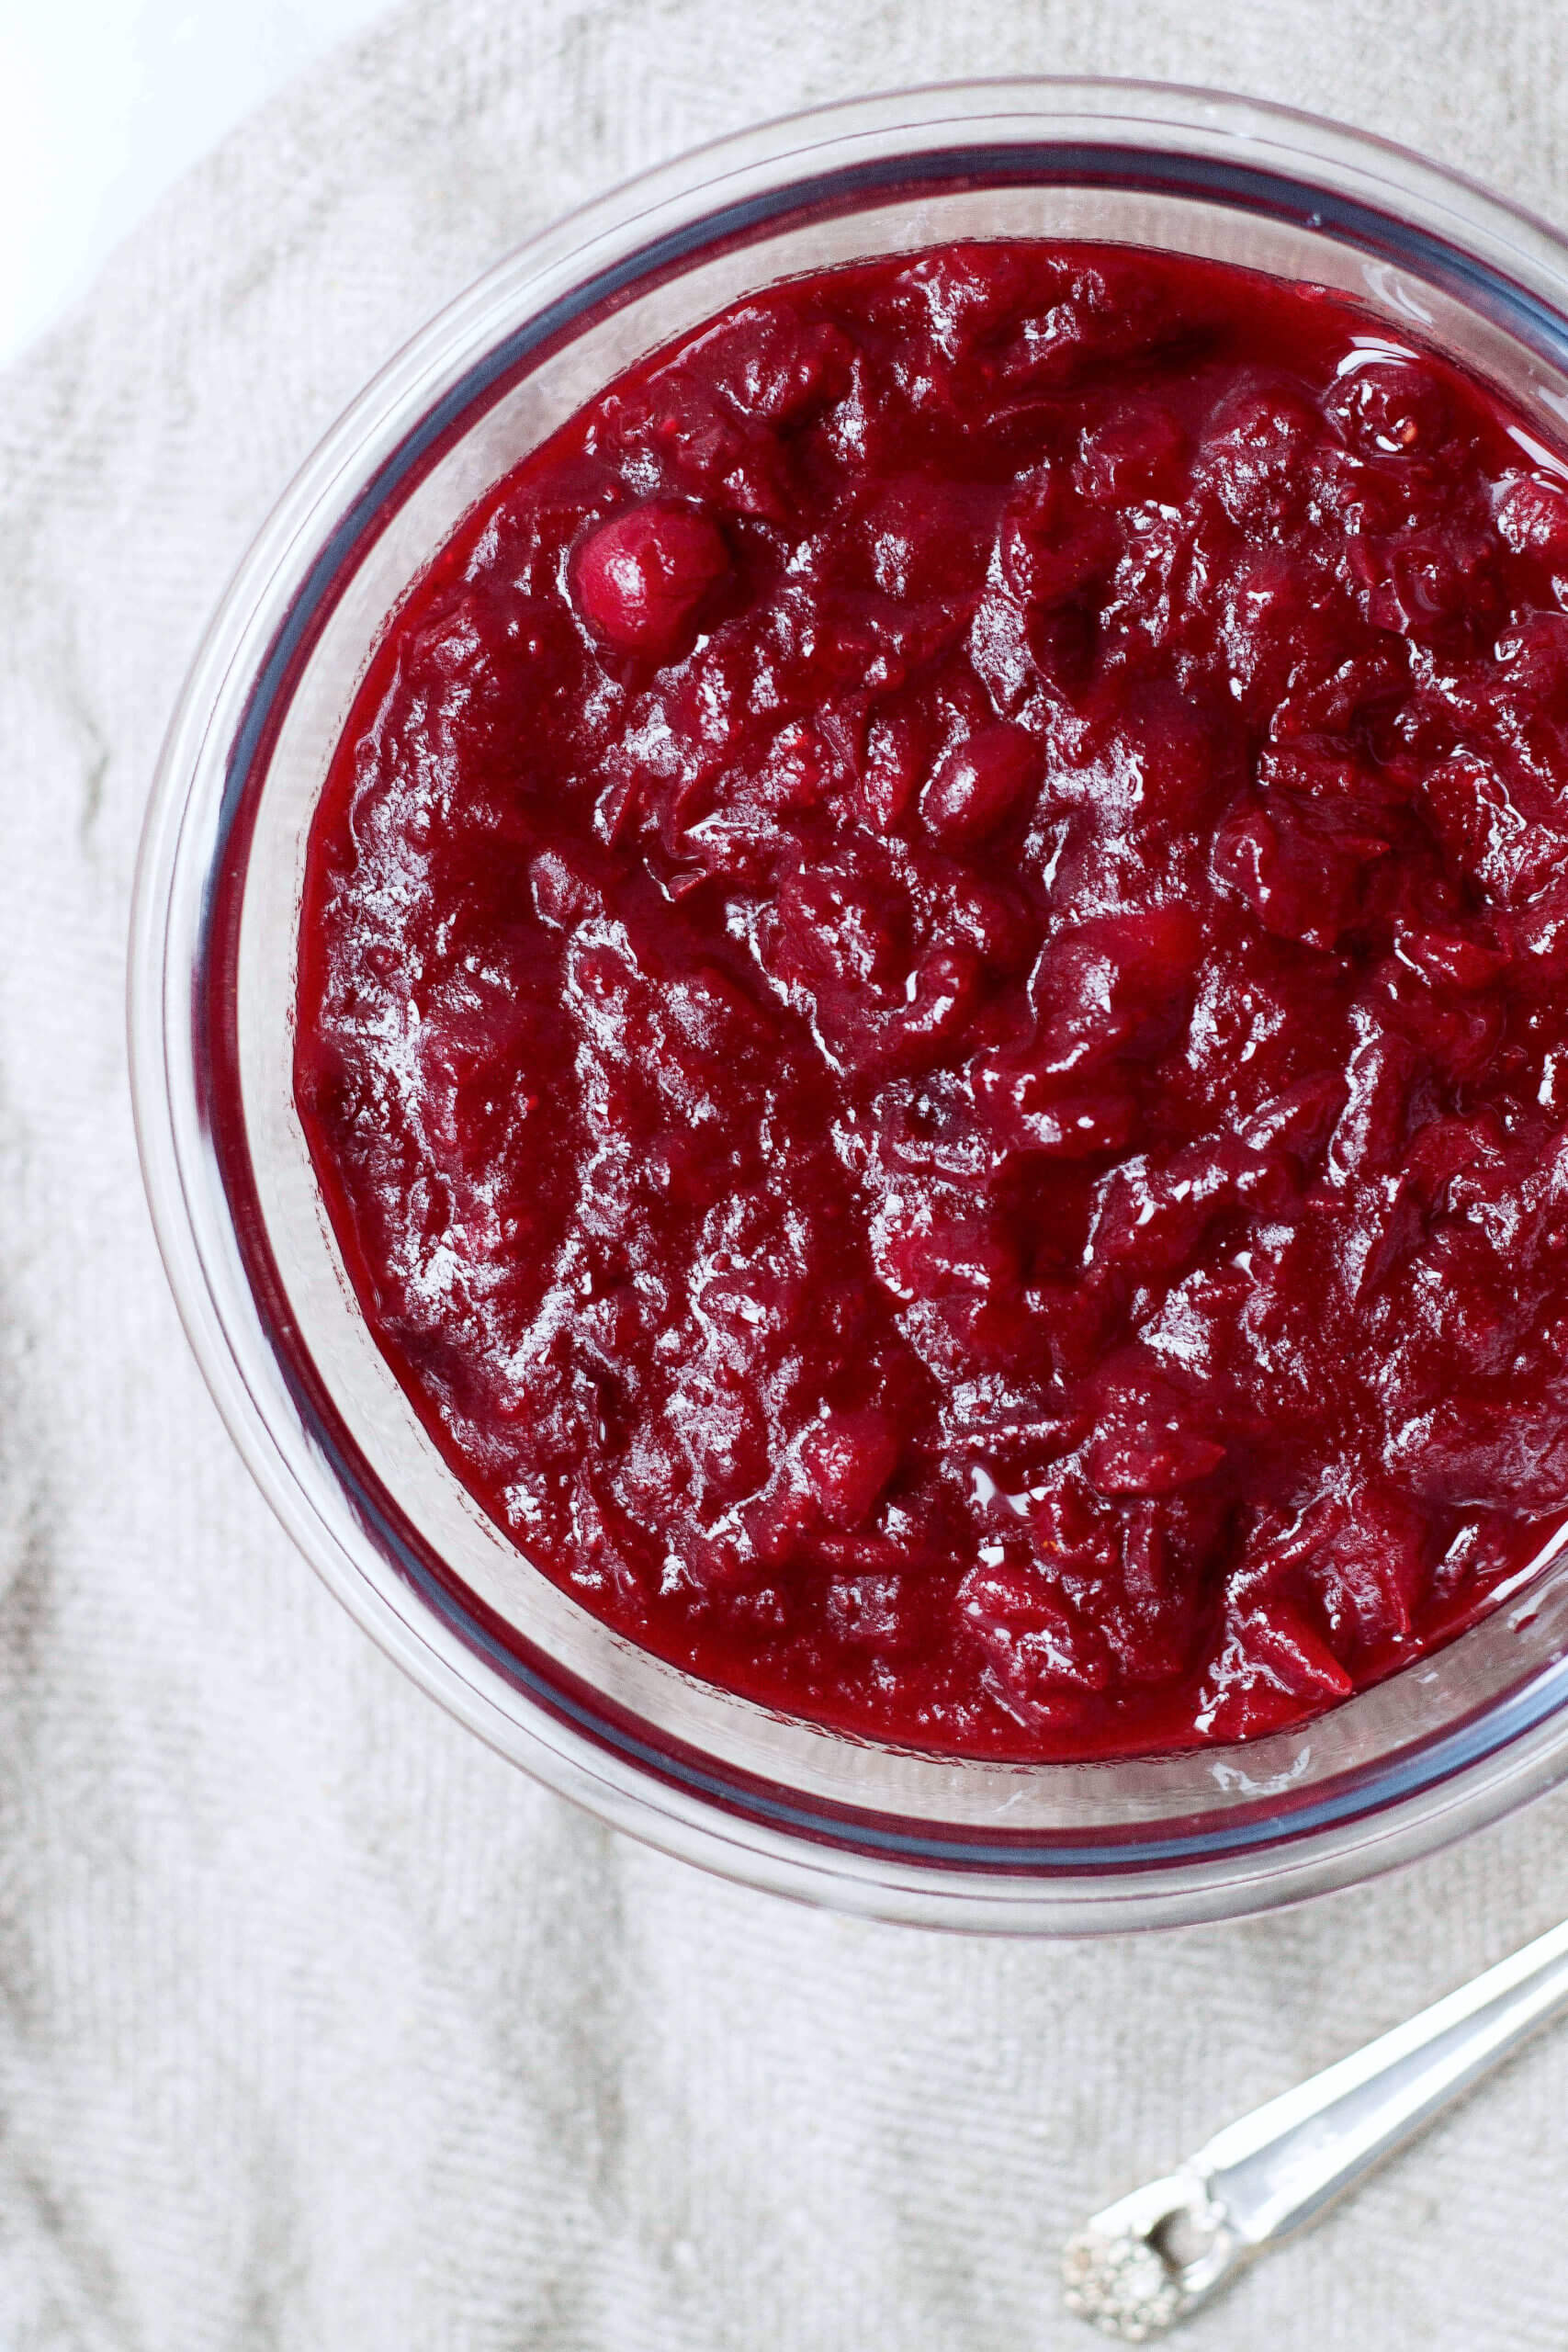 Overhead image of cranberry sauce in a glass bowl